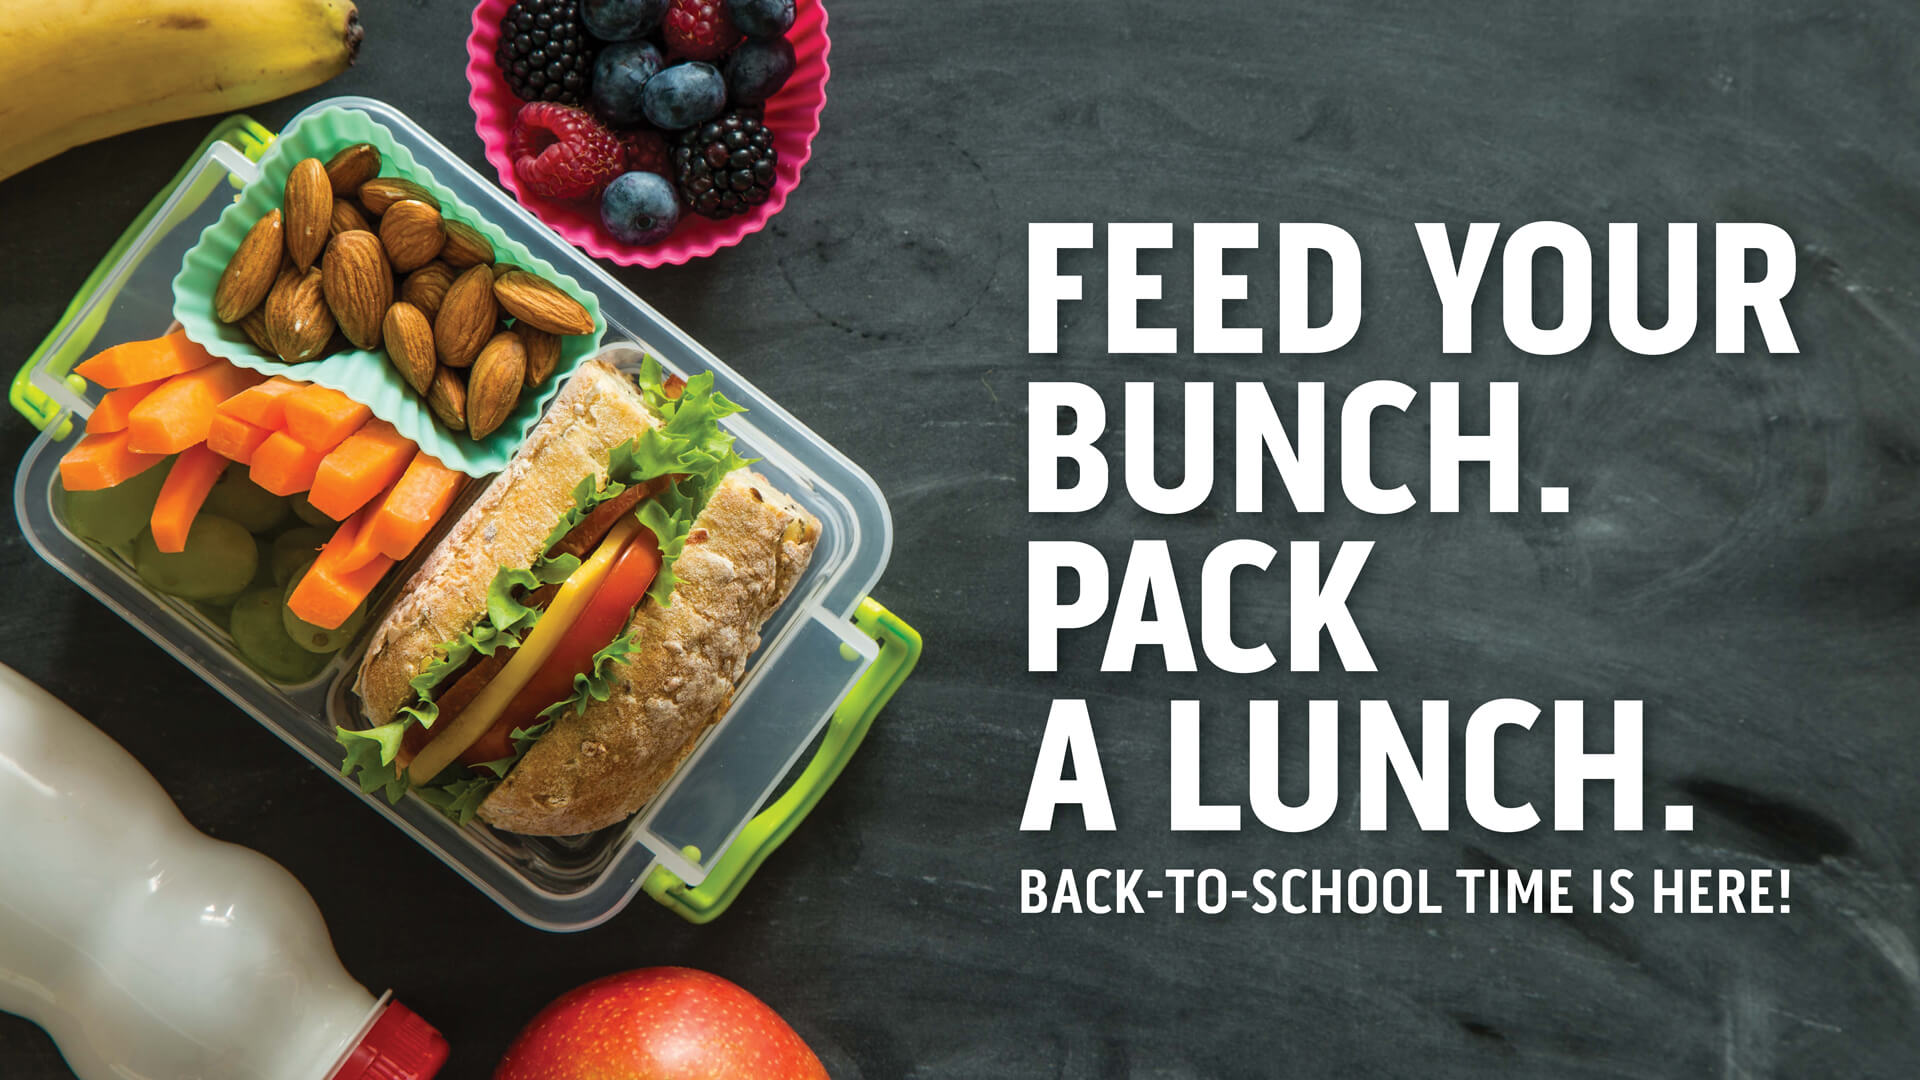 Feed your bunch. Pack a lunch.